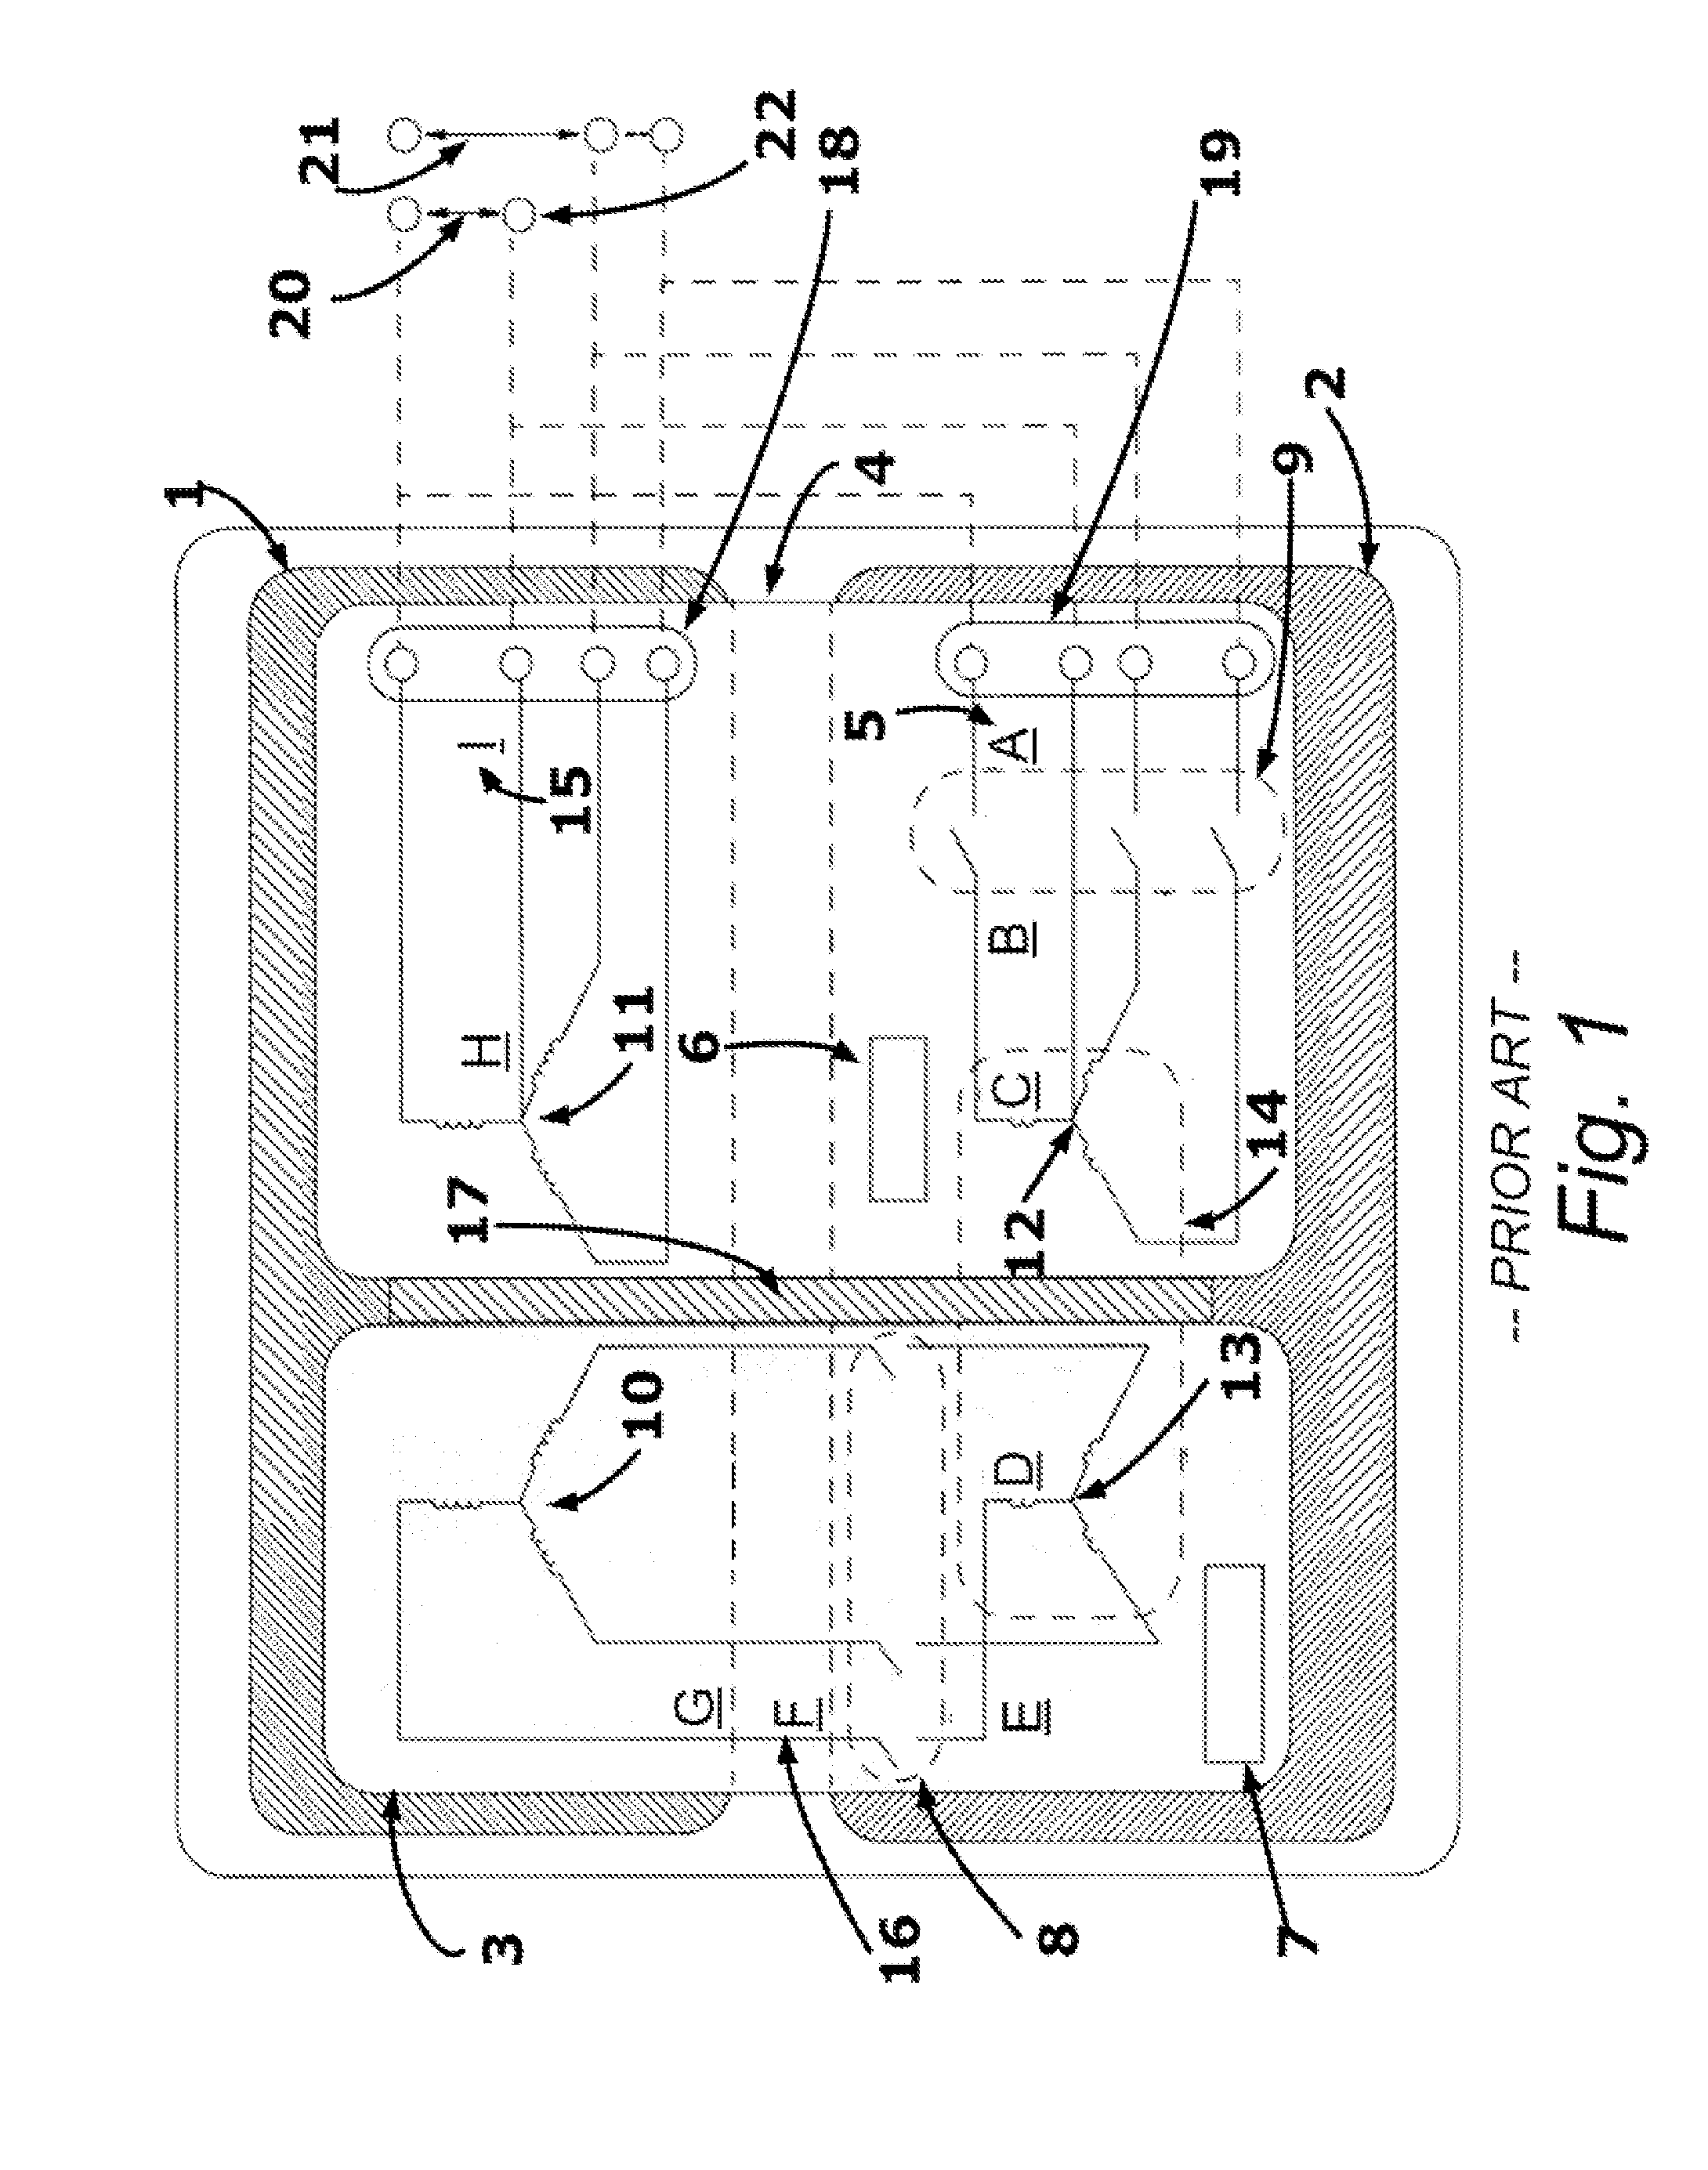 Brushless Multiphase Self-Commutation Control (or BMSCC) And Related Invention